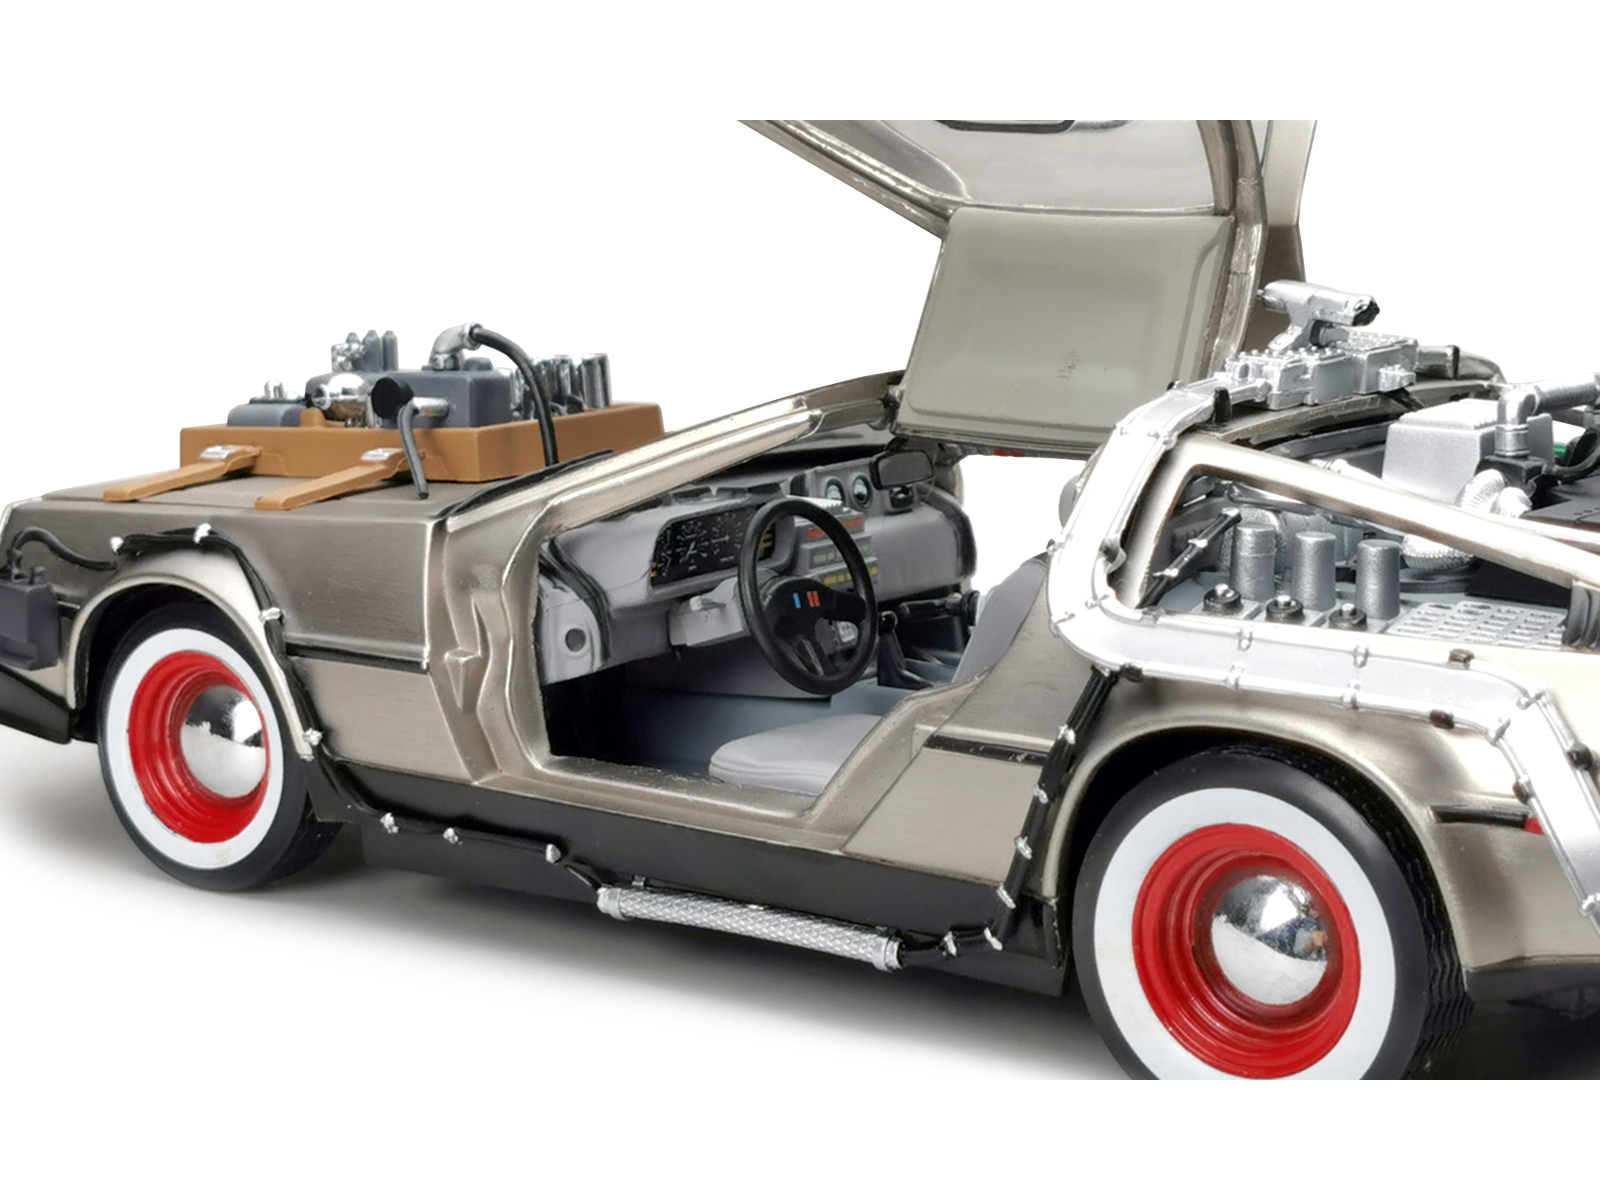 Sun Star DMC DeLorean Time Machine Stainless Steel "Back to the Future: Part III" (1990) Movie 1/18 Diecast Model Car by Sun Star